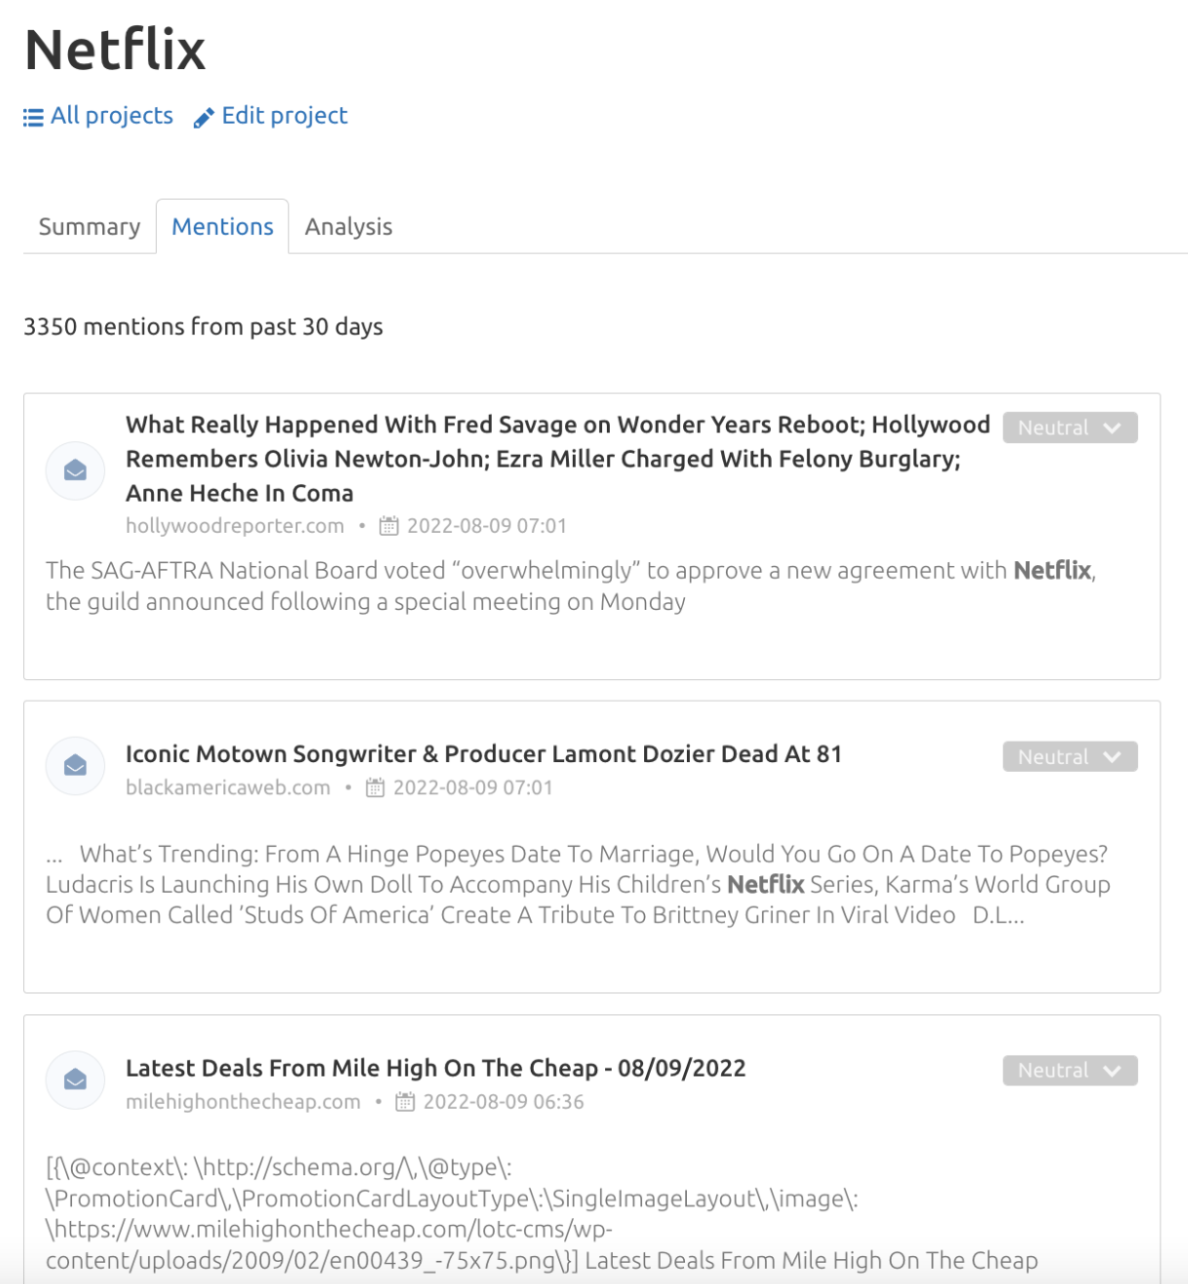 Netflix mentions dashboard in Media Monitoring app